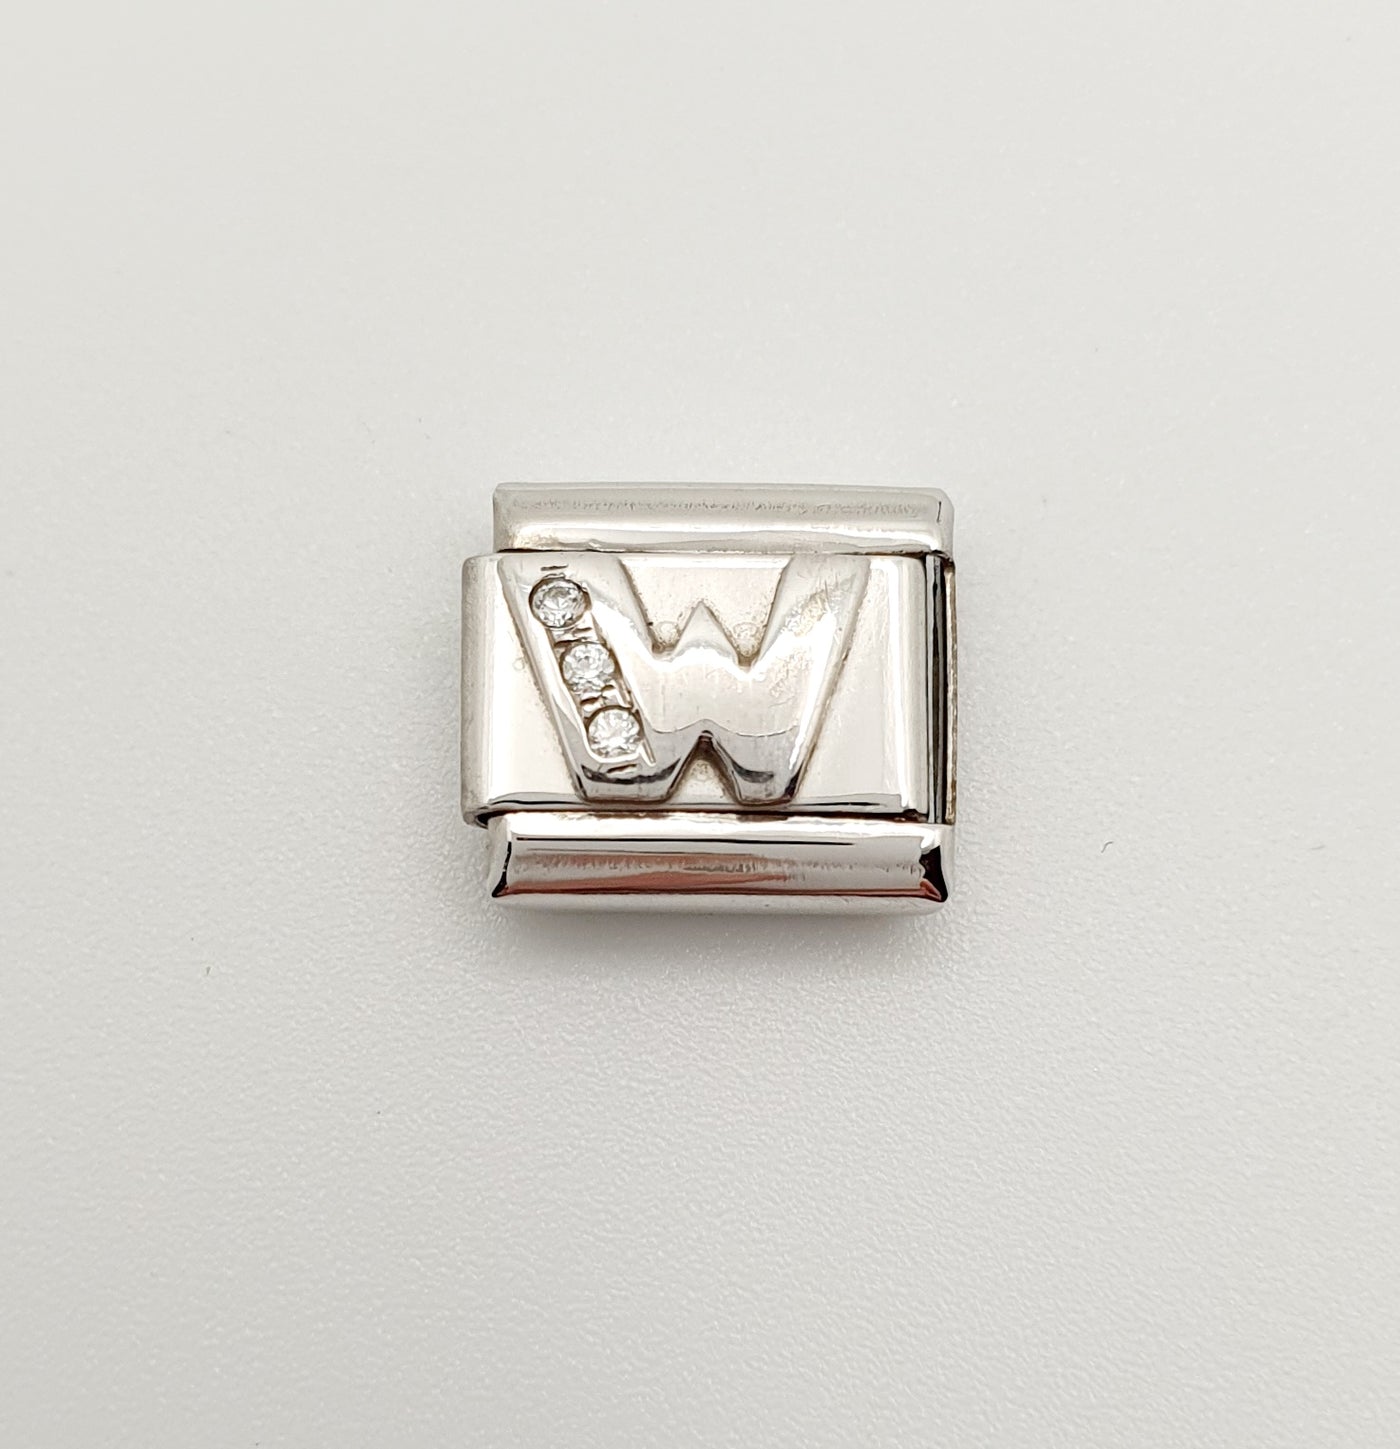 Nomination Charm Link "W" Stainless Steel with CZ's & 925 Silver, 330301 23